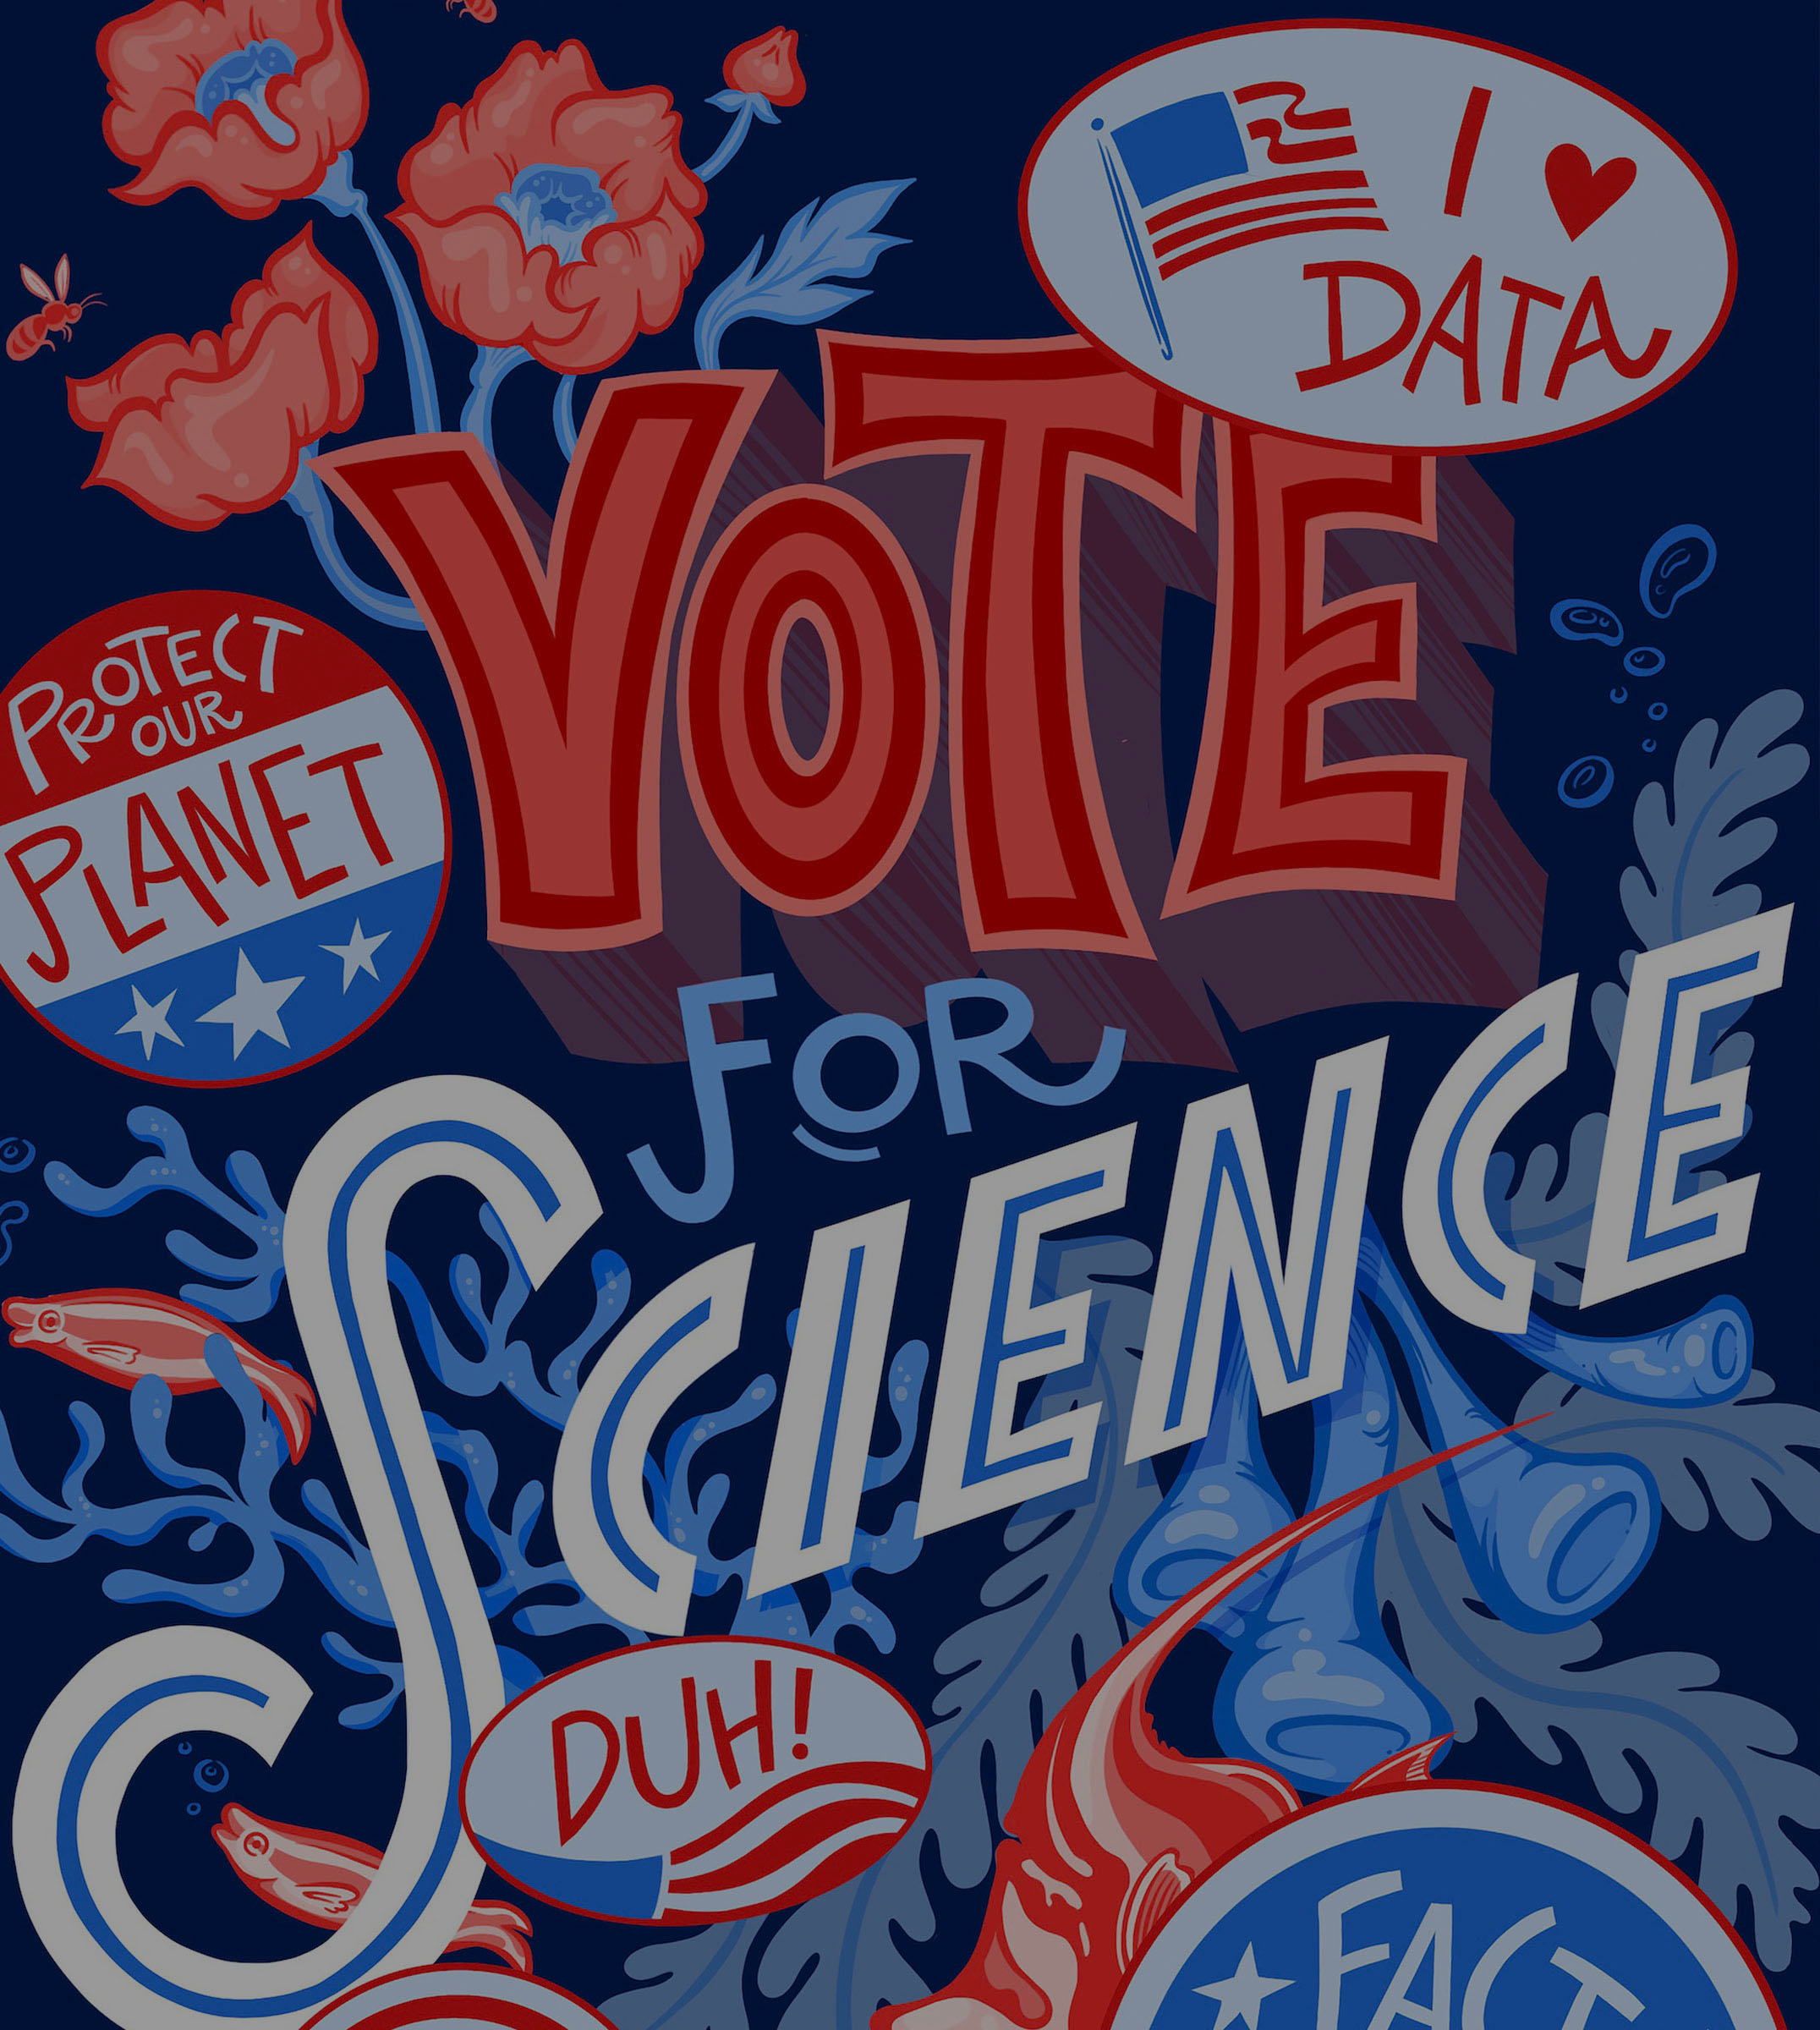 Vote for Science